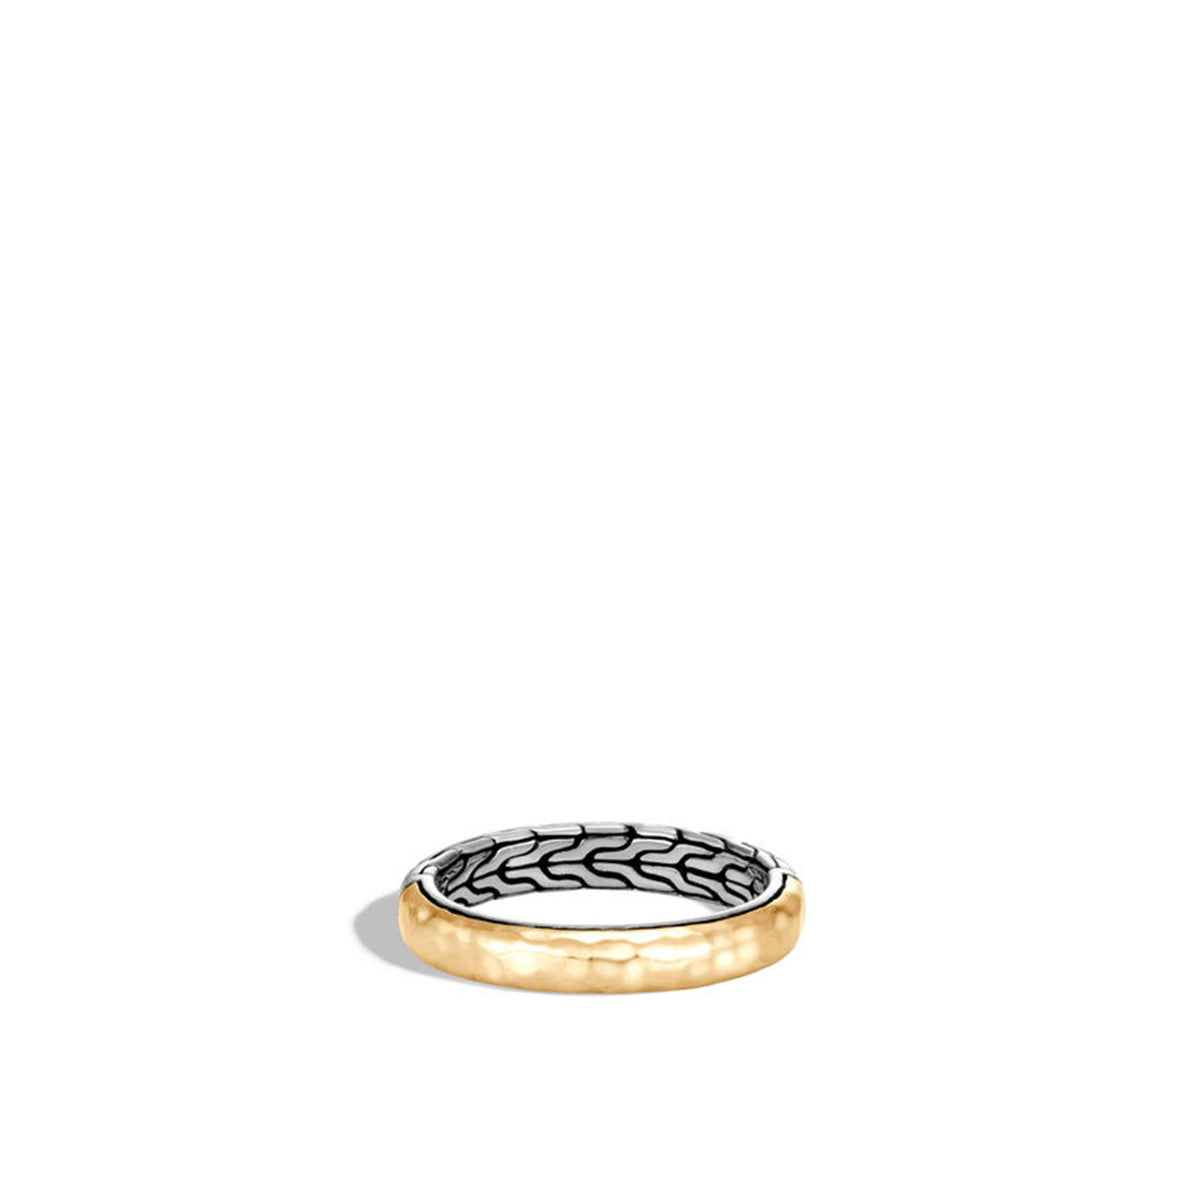 John Hardy 18K Gold & Silver Hammered Ring